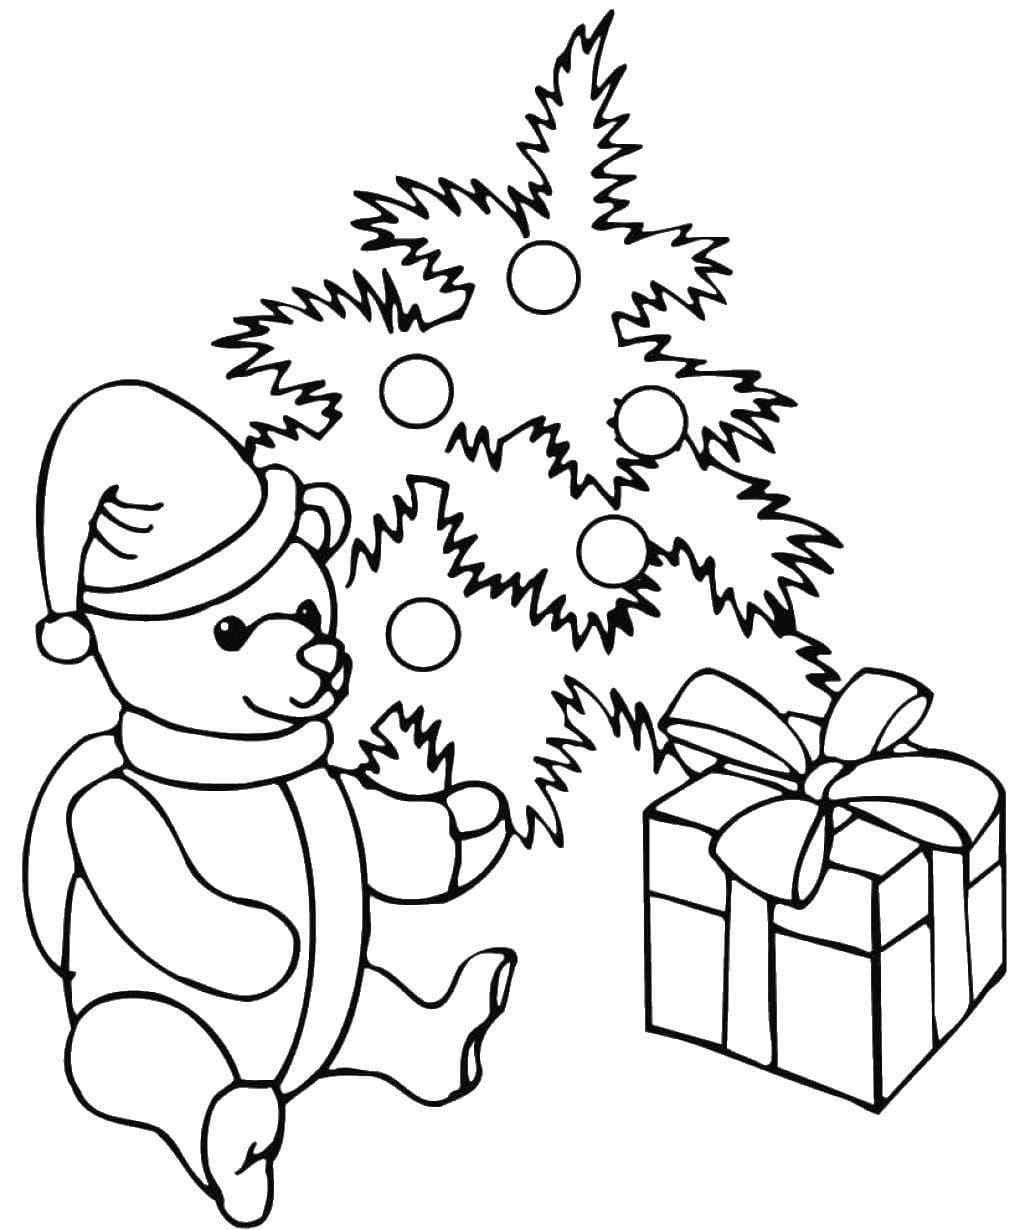 Bear Tree Gift Coloring Page